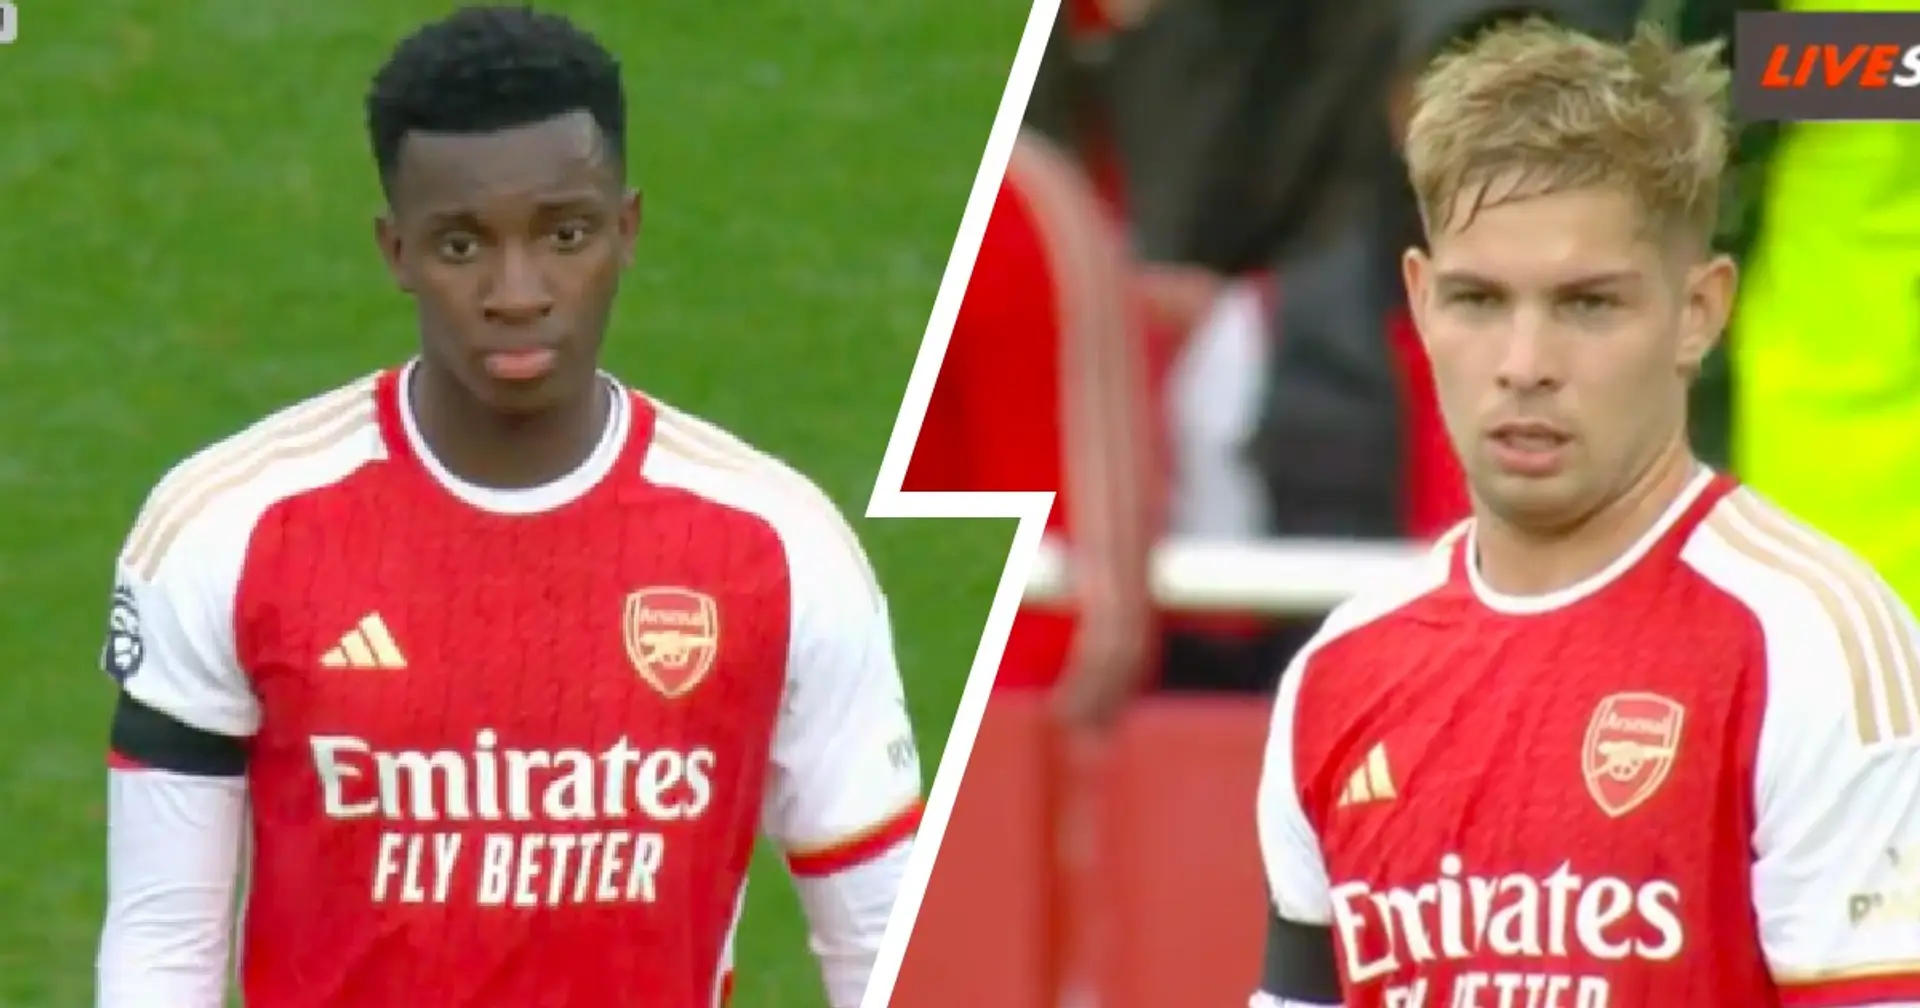 Nketiah - 10, Rice - 9: Arsenal player ratings in Sheffield victory